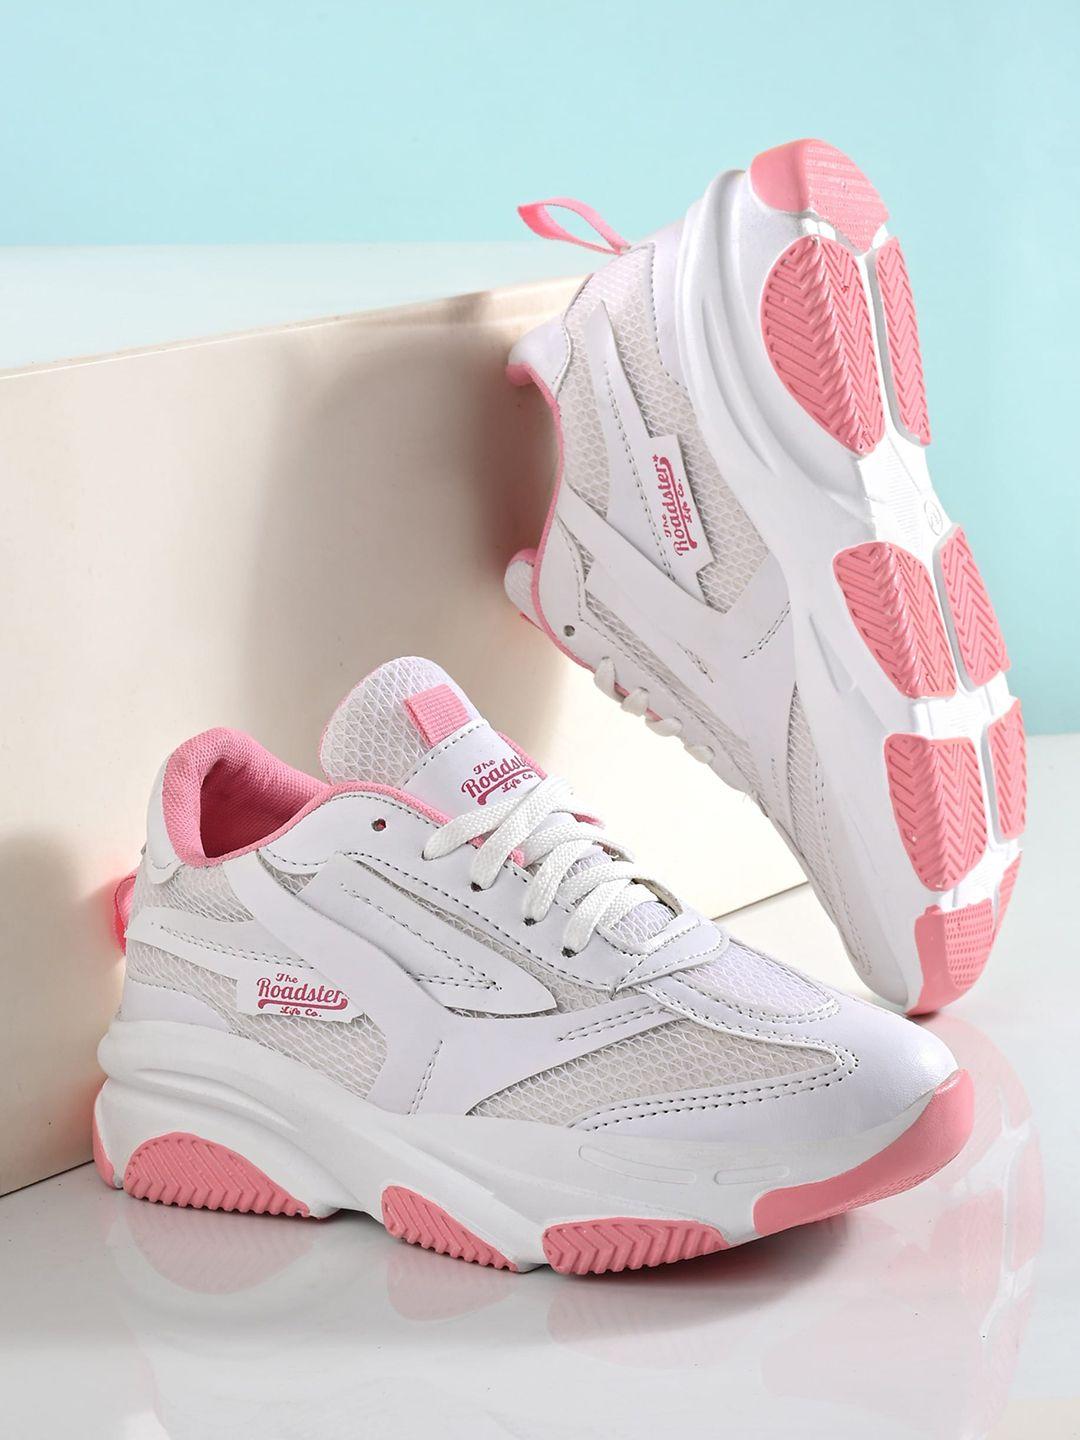 the-roadster-lifestyle-co.-women-white-&-pink-woven-design-comfort-insole-mesh-sneakers